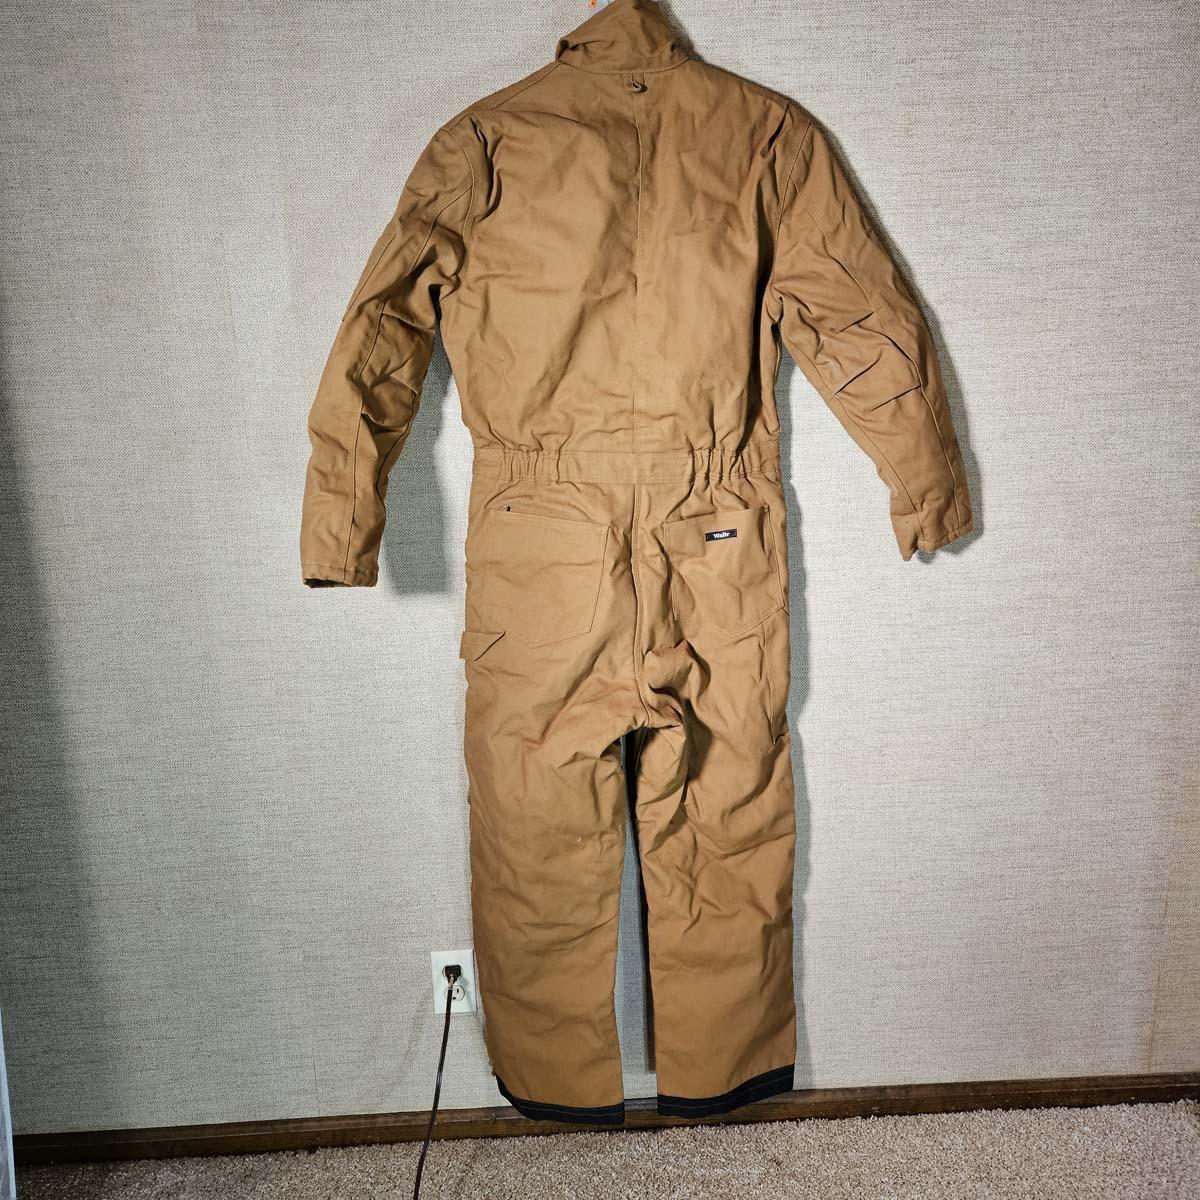 Walls Workwear Insulated Coveralls - Size Medium | Armstrong Family ...